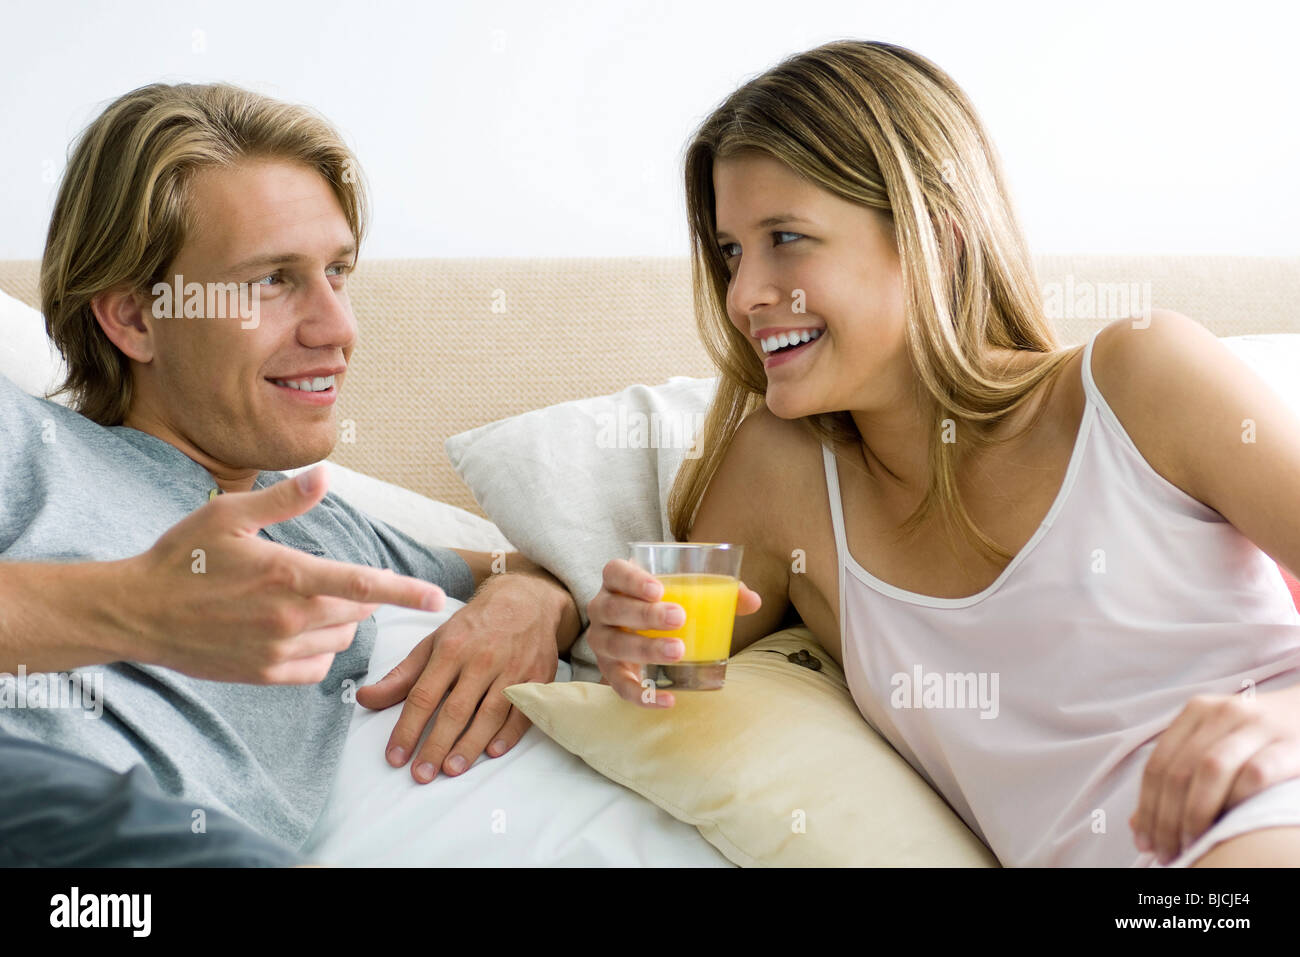 Couple talking together in bed, woman holding glass of orange juice Stock Photo